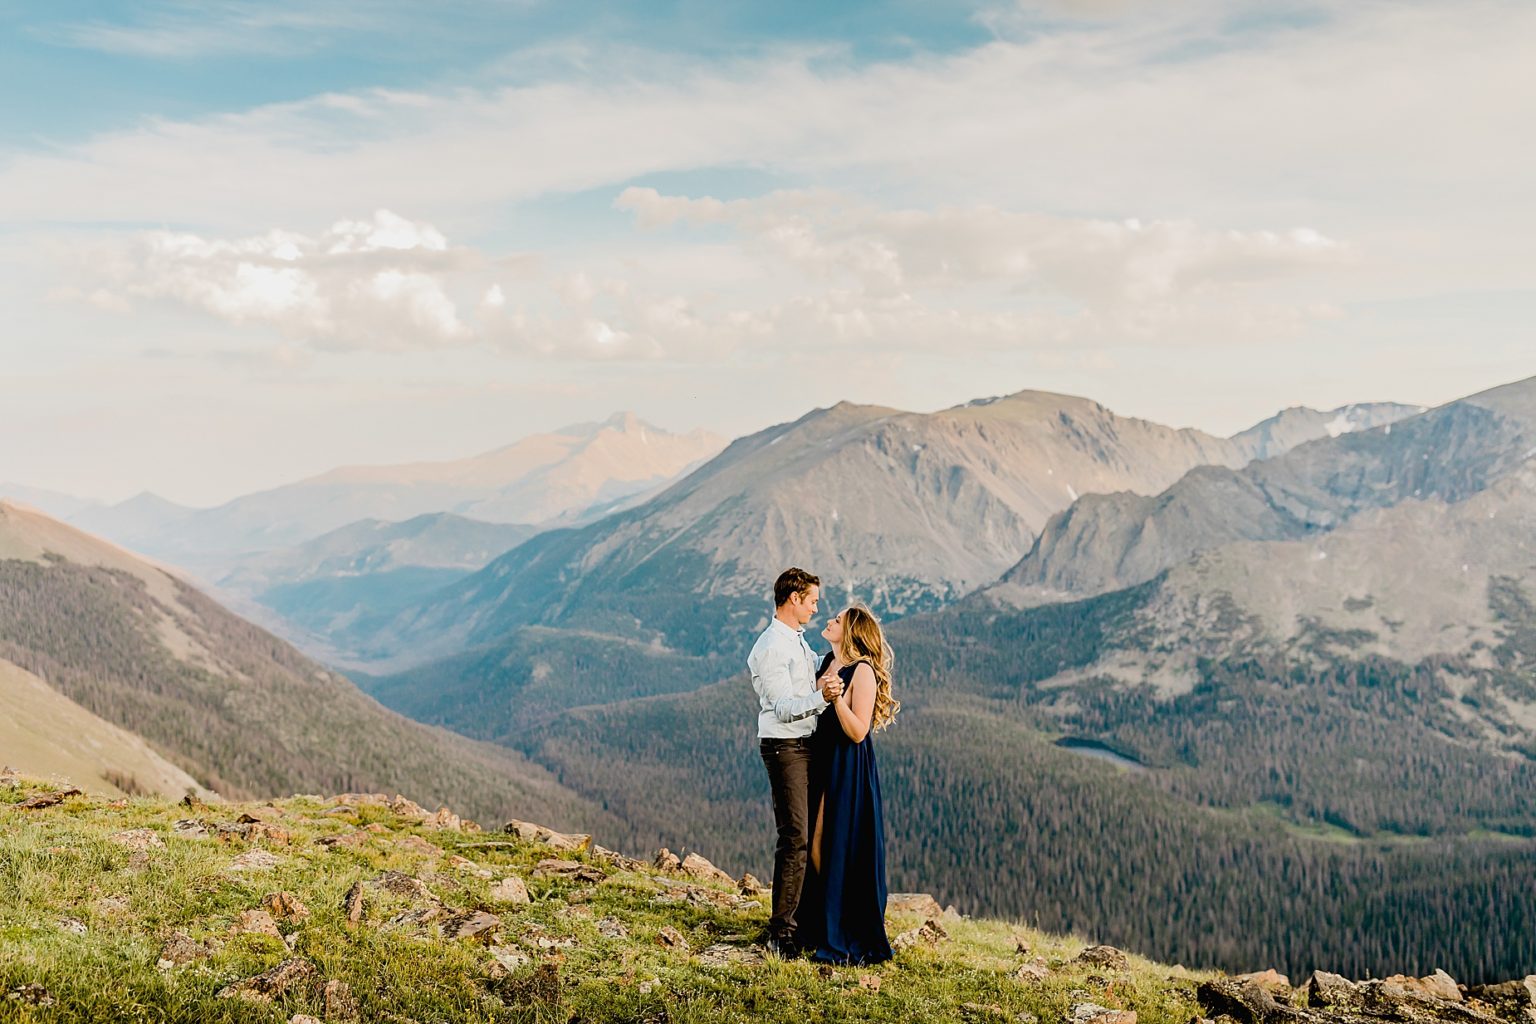 couple embraces together with stunning colorado mountain scenery in the background